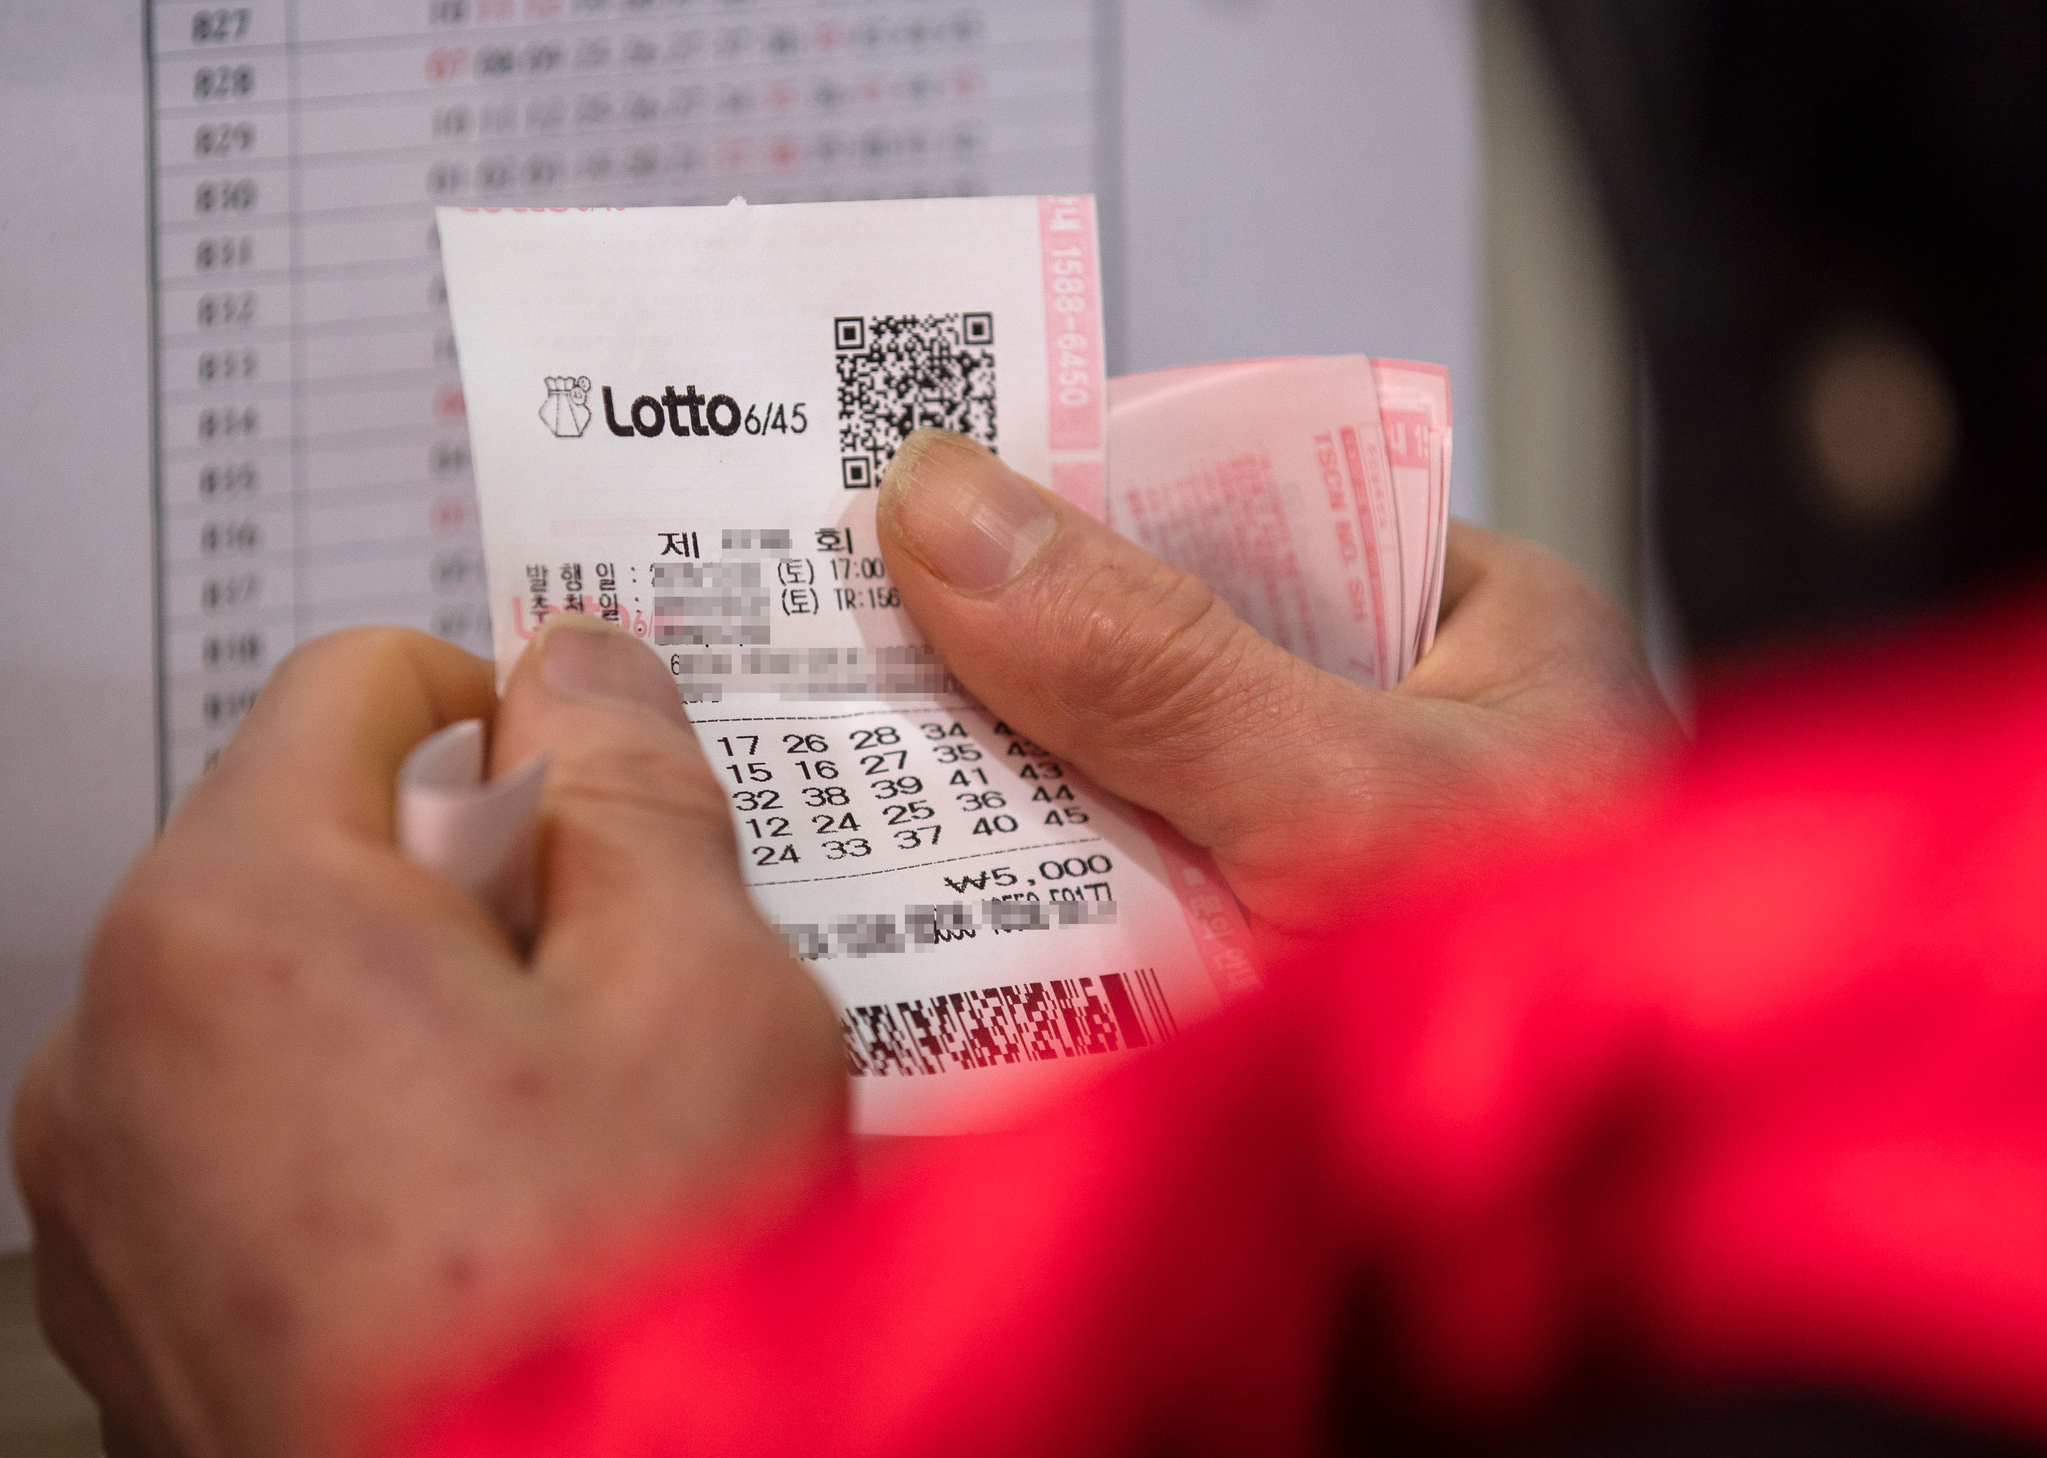 50 billion won annually in lottery winnings that have not been visited…  Should I visit if the payment period is extended?